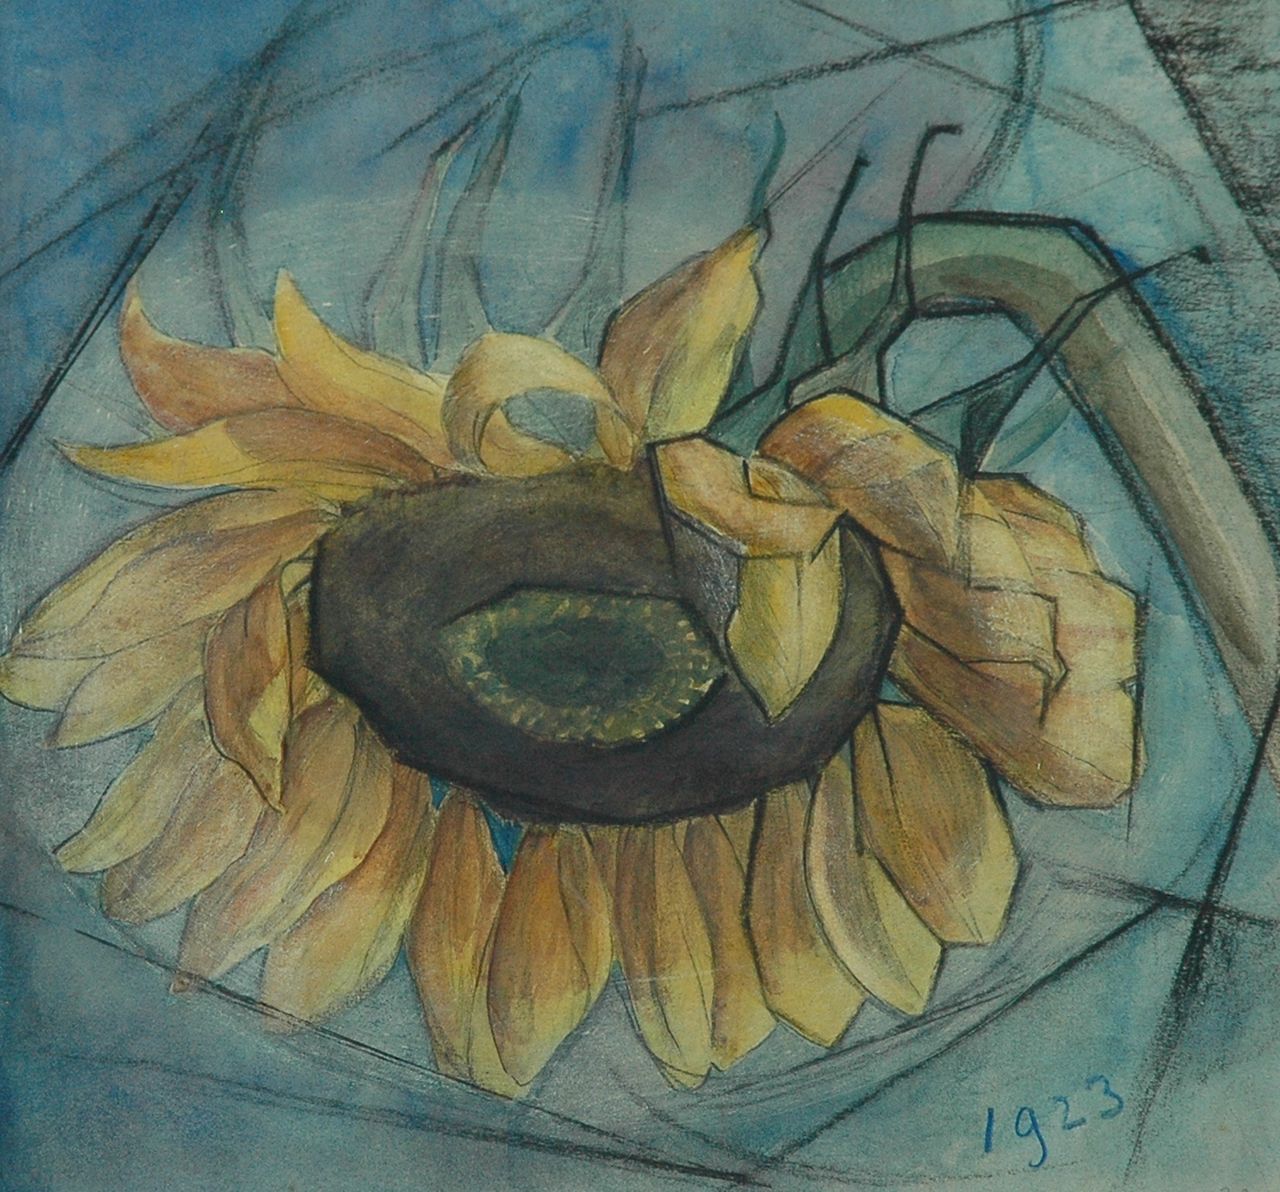 Fiks A.  | Albert Fiks, Sunflower, black chalk and watercolour on paper 25.6 x 25.4 cm, dated 1923